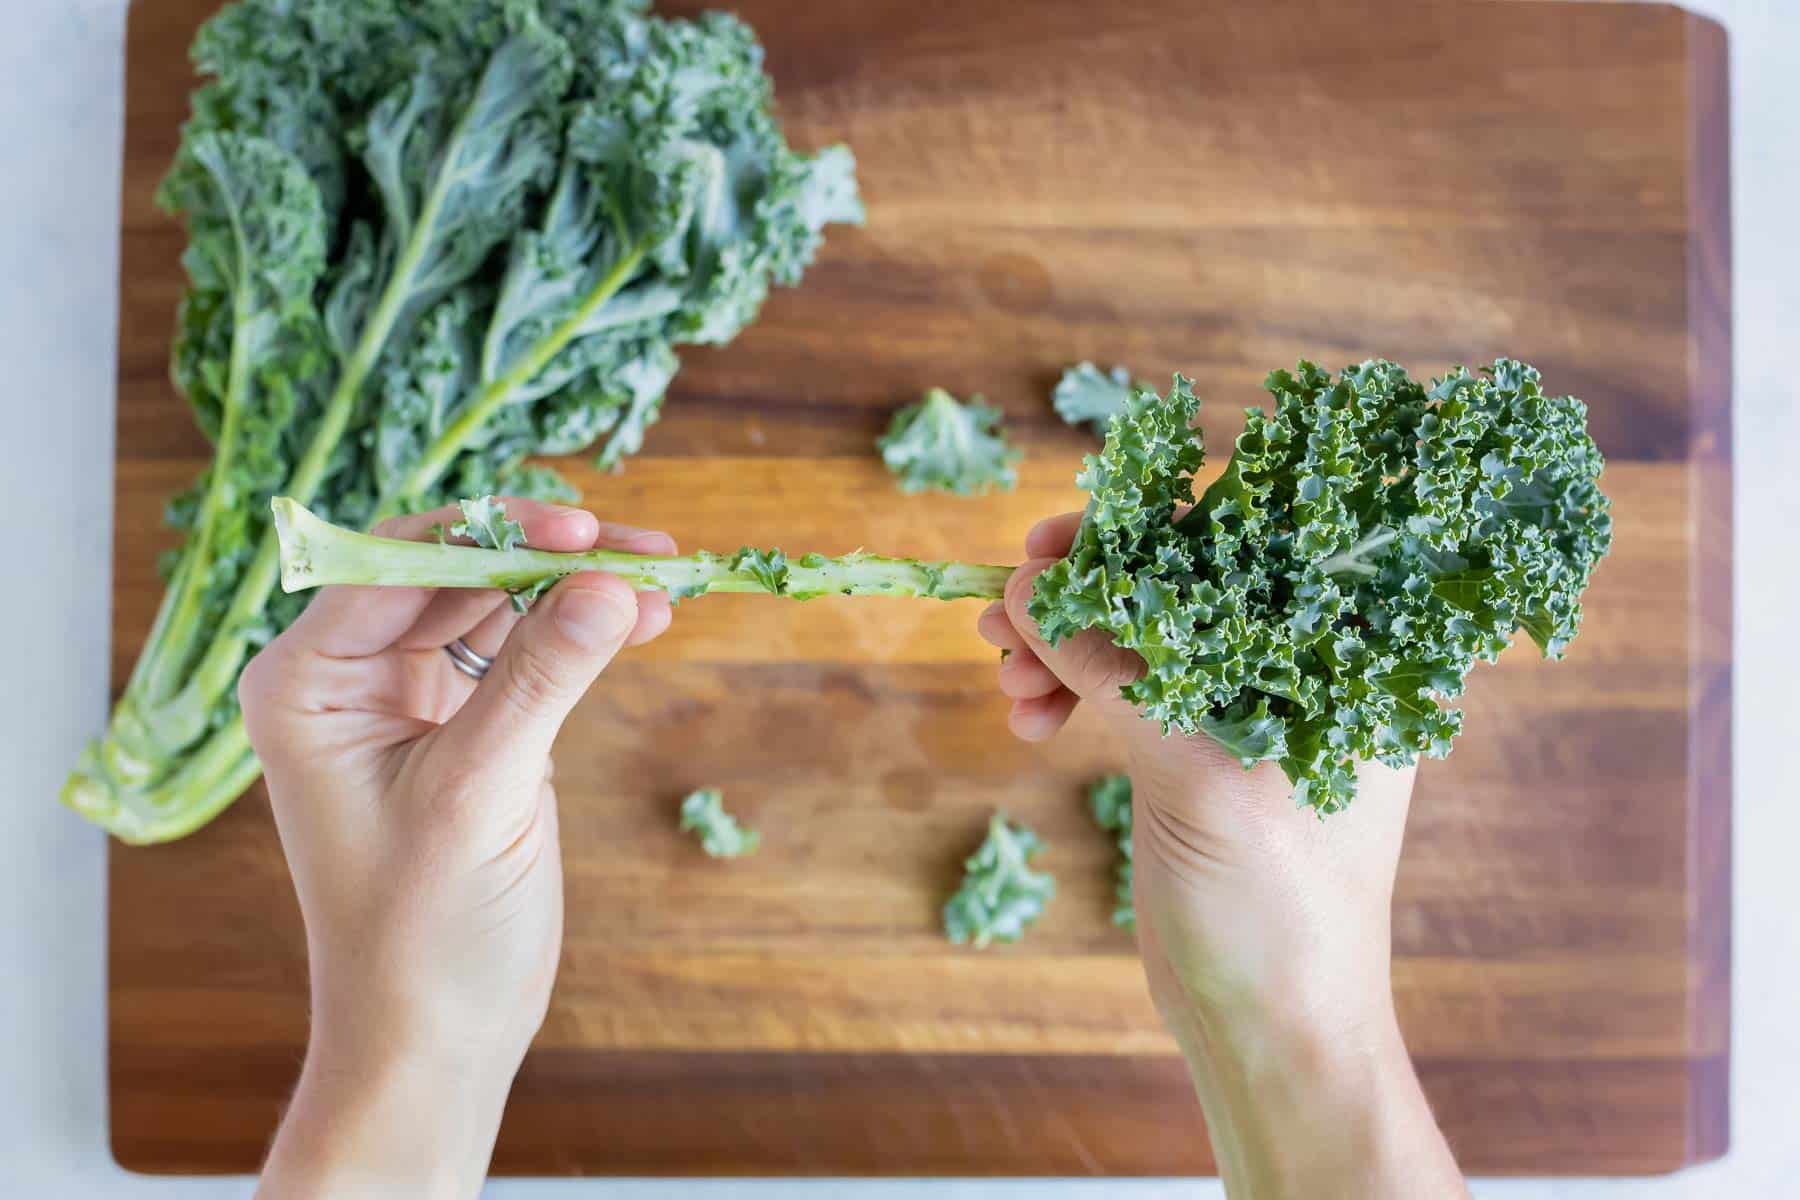 Kale leaves are pulled off the spine with your hands.